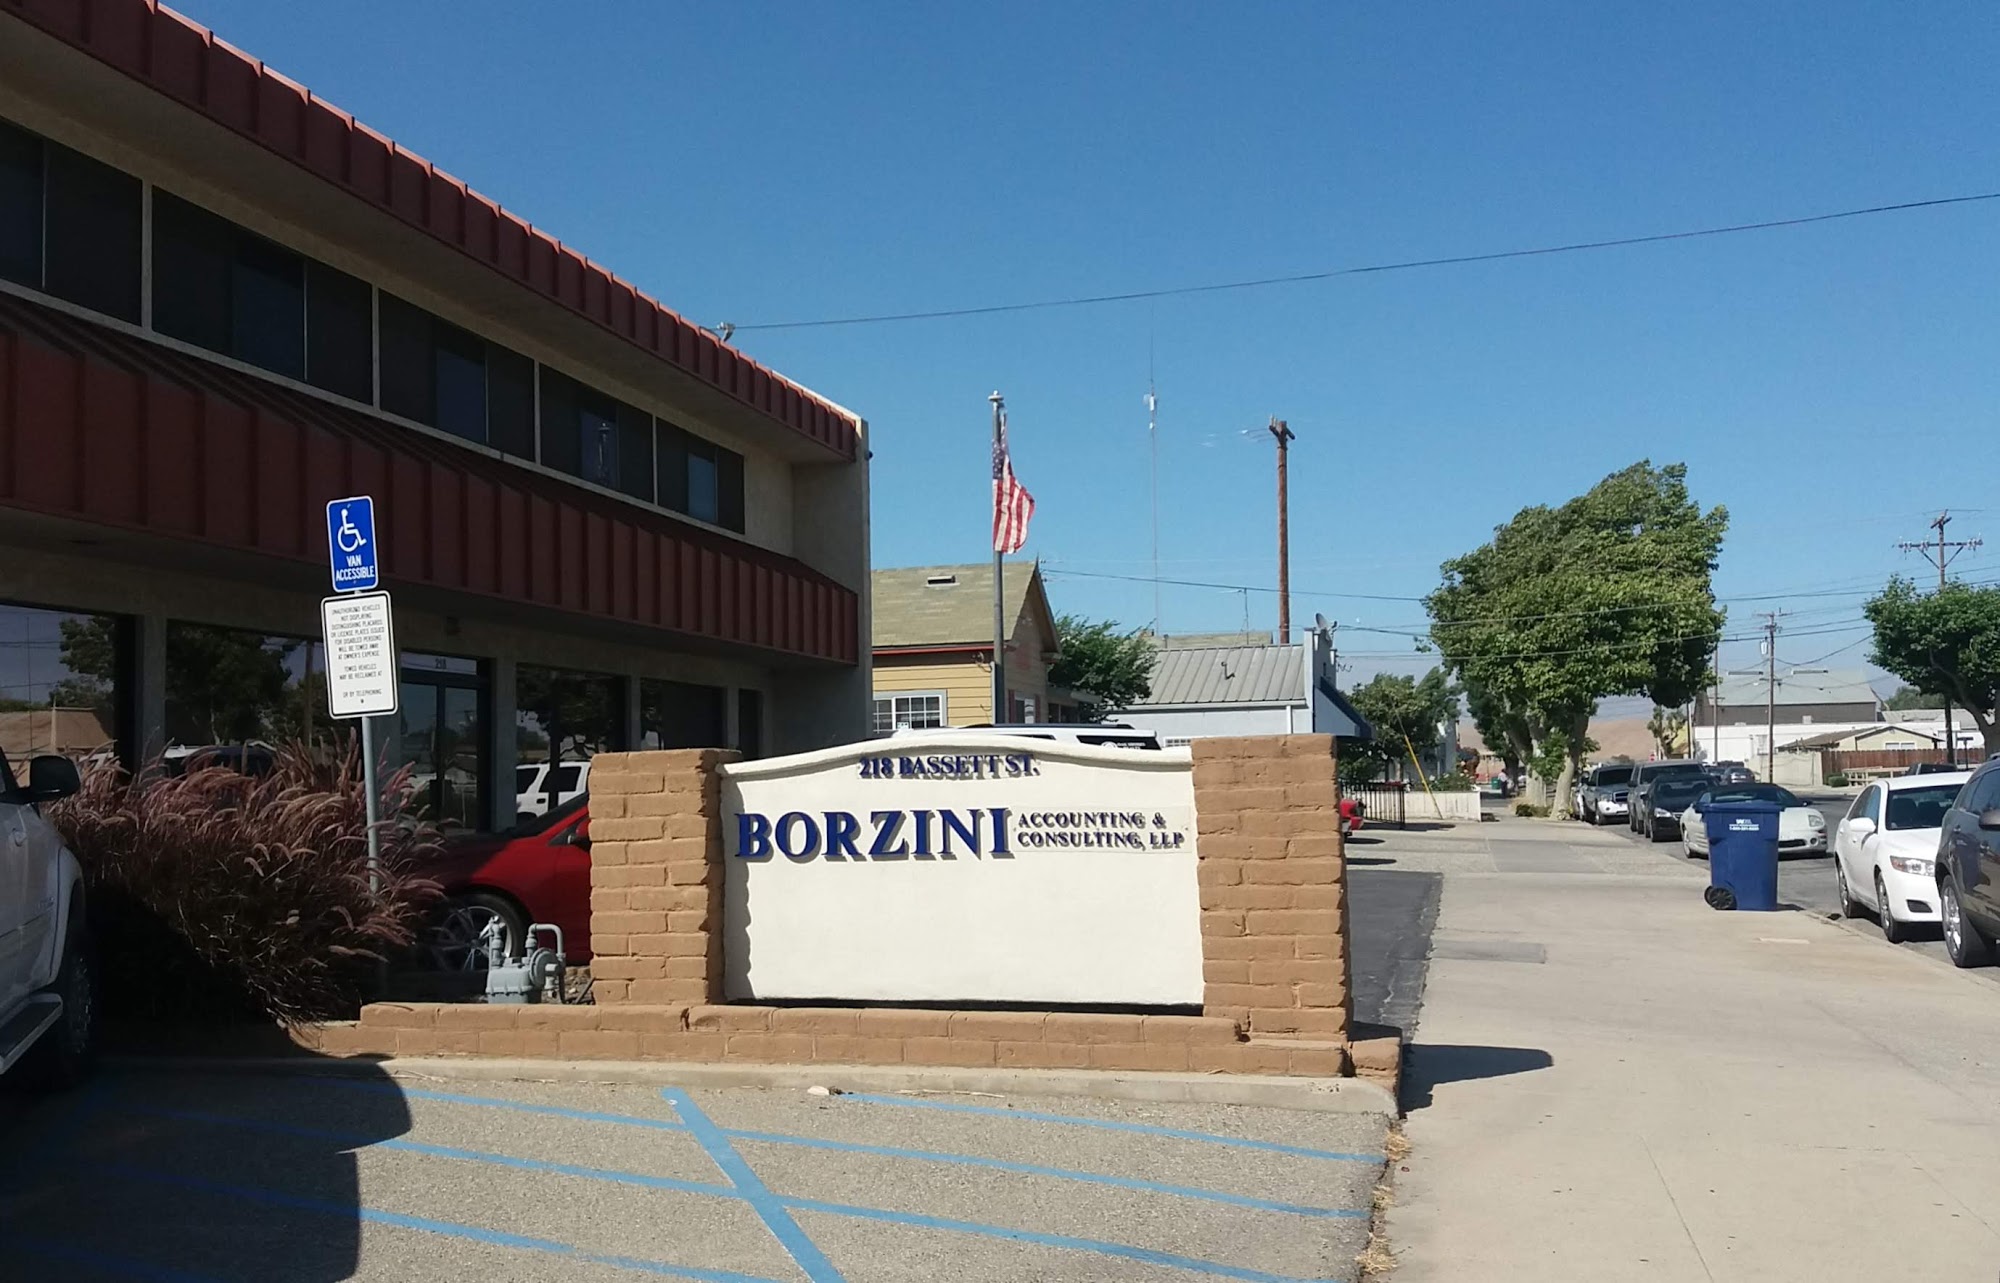 Borzini Accounting & Consulting, LLP